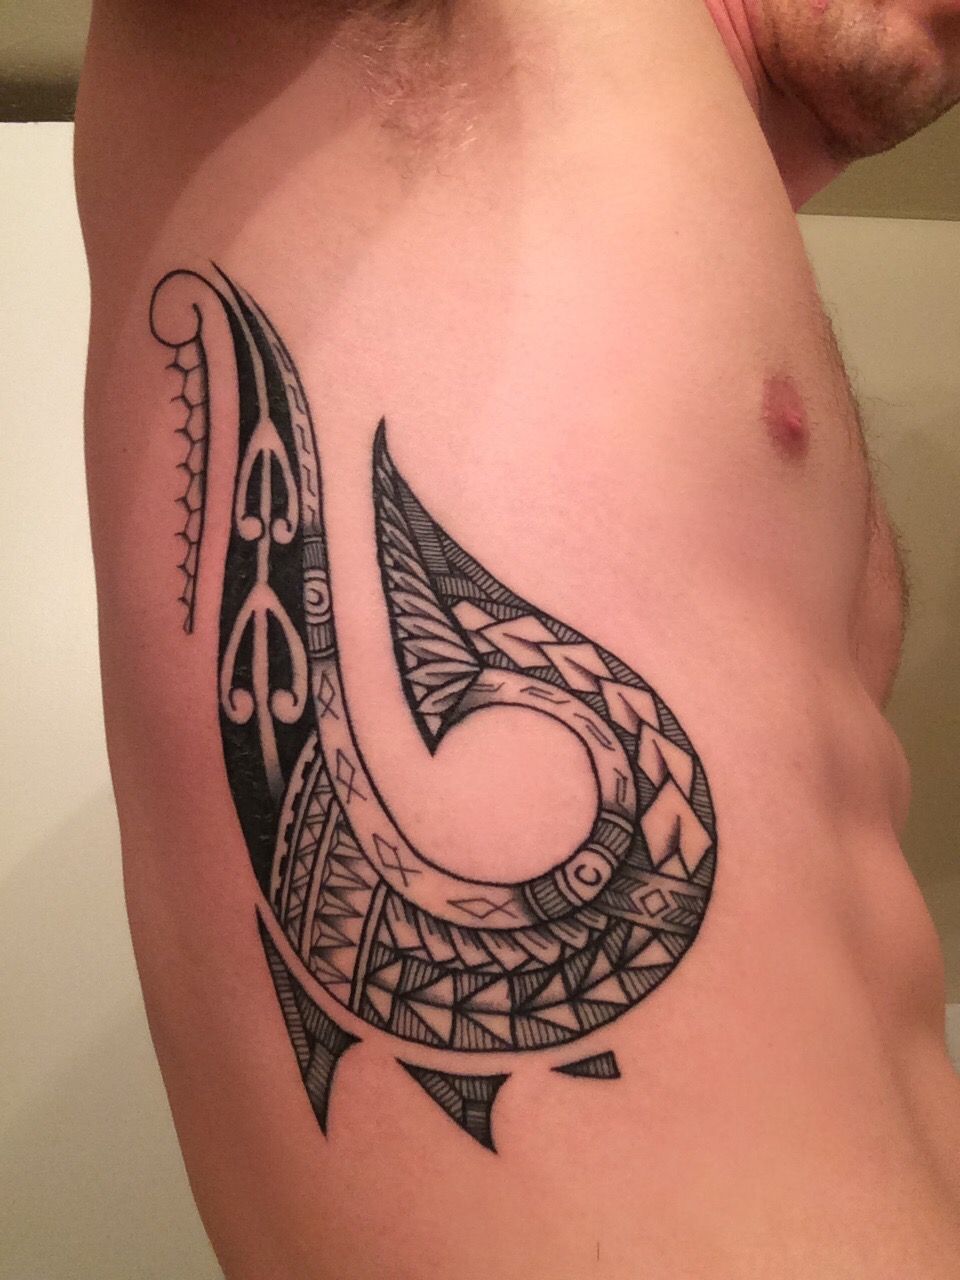 Maori Tattoo Meanings: Understanding the Symbolism and Significance